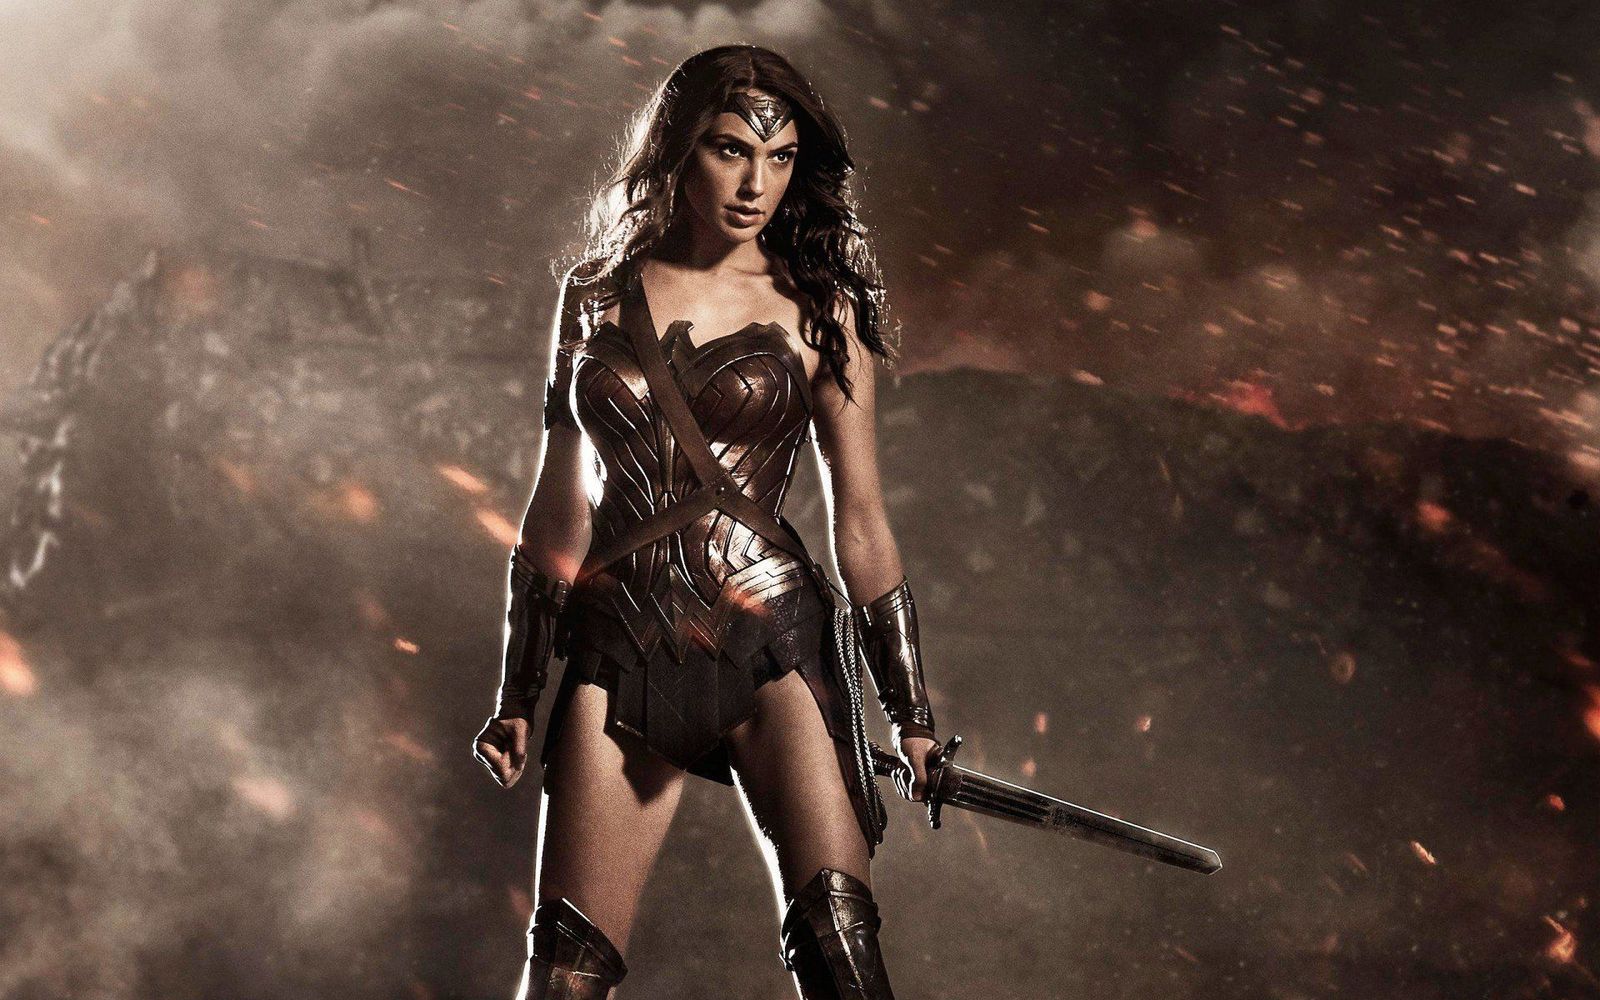 I'm Not A Fighter But I Will Fight For Good: Gal Gadot